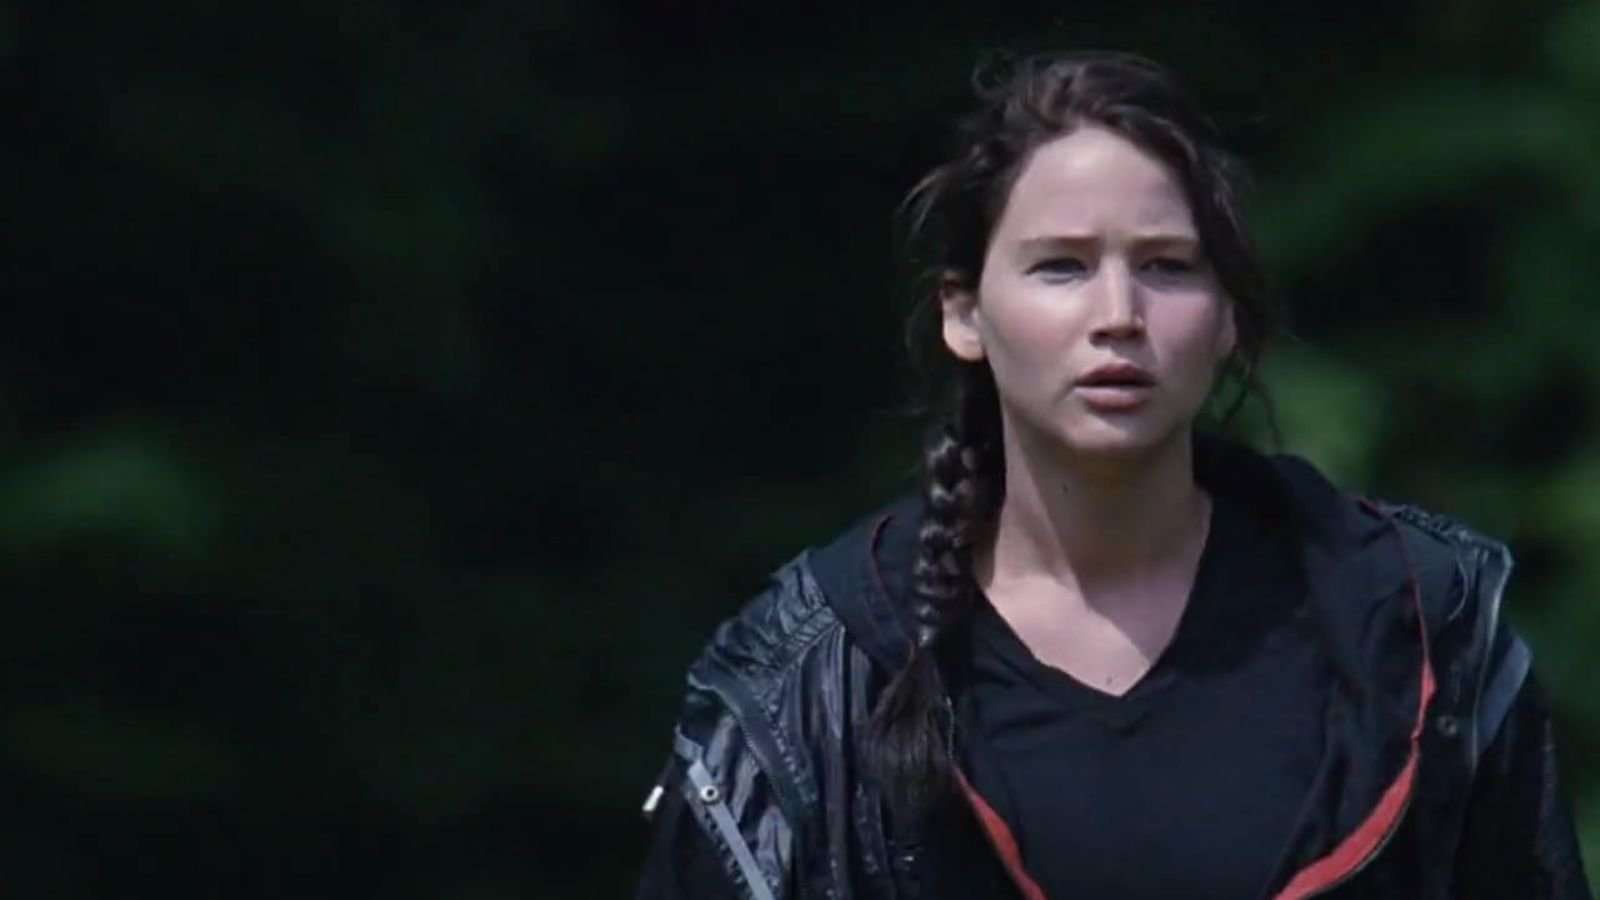 <p><span> Suzanne Collins painted a world of stark contrasts, from the Capitol’s luxury to the districts’ grim reality. The film adaptation brought this dichotomy to life, with Jennifer Lawrence’s Katniss leading the charge. Every arrow shot, and every act of defiance made us root for the girl on fire even more.</span></p>